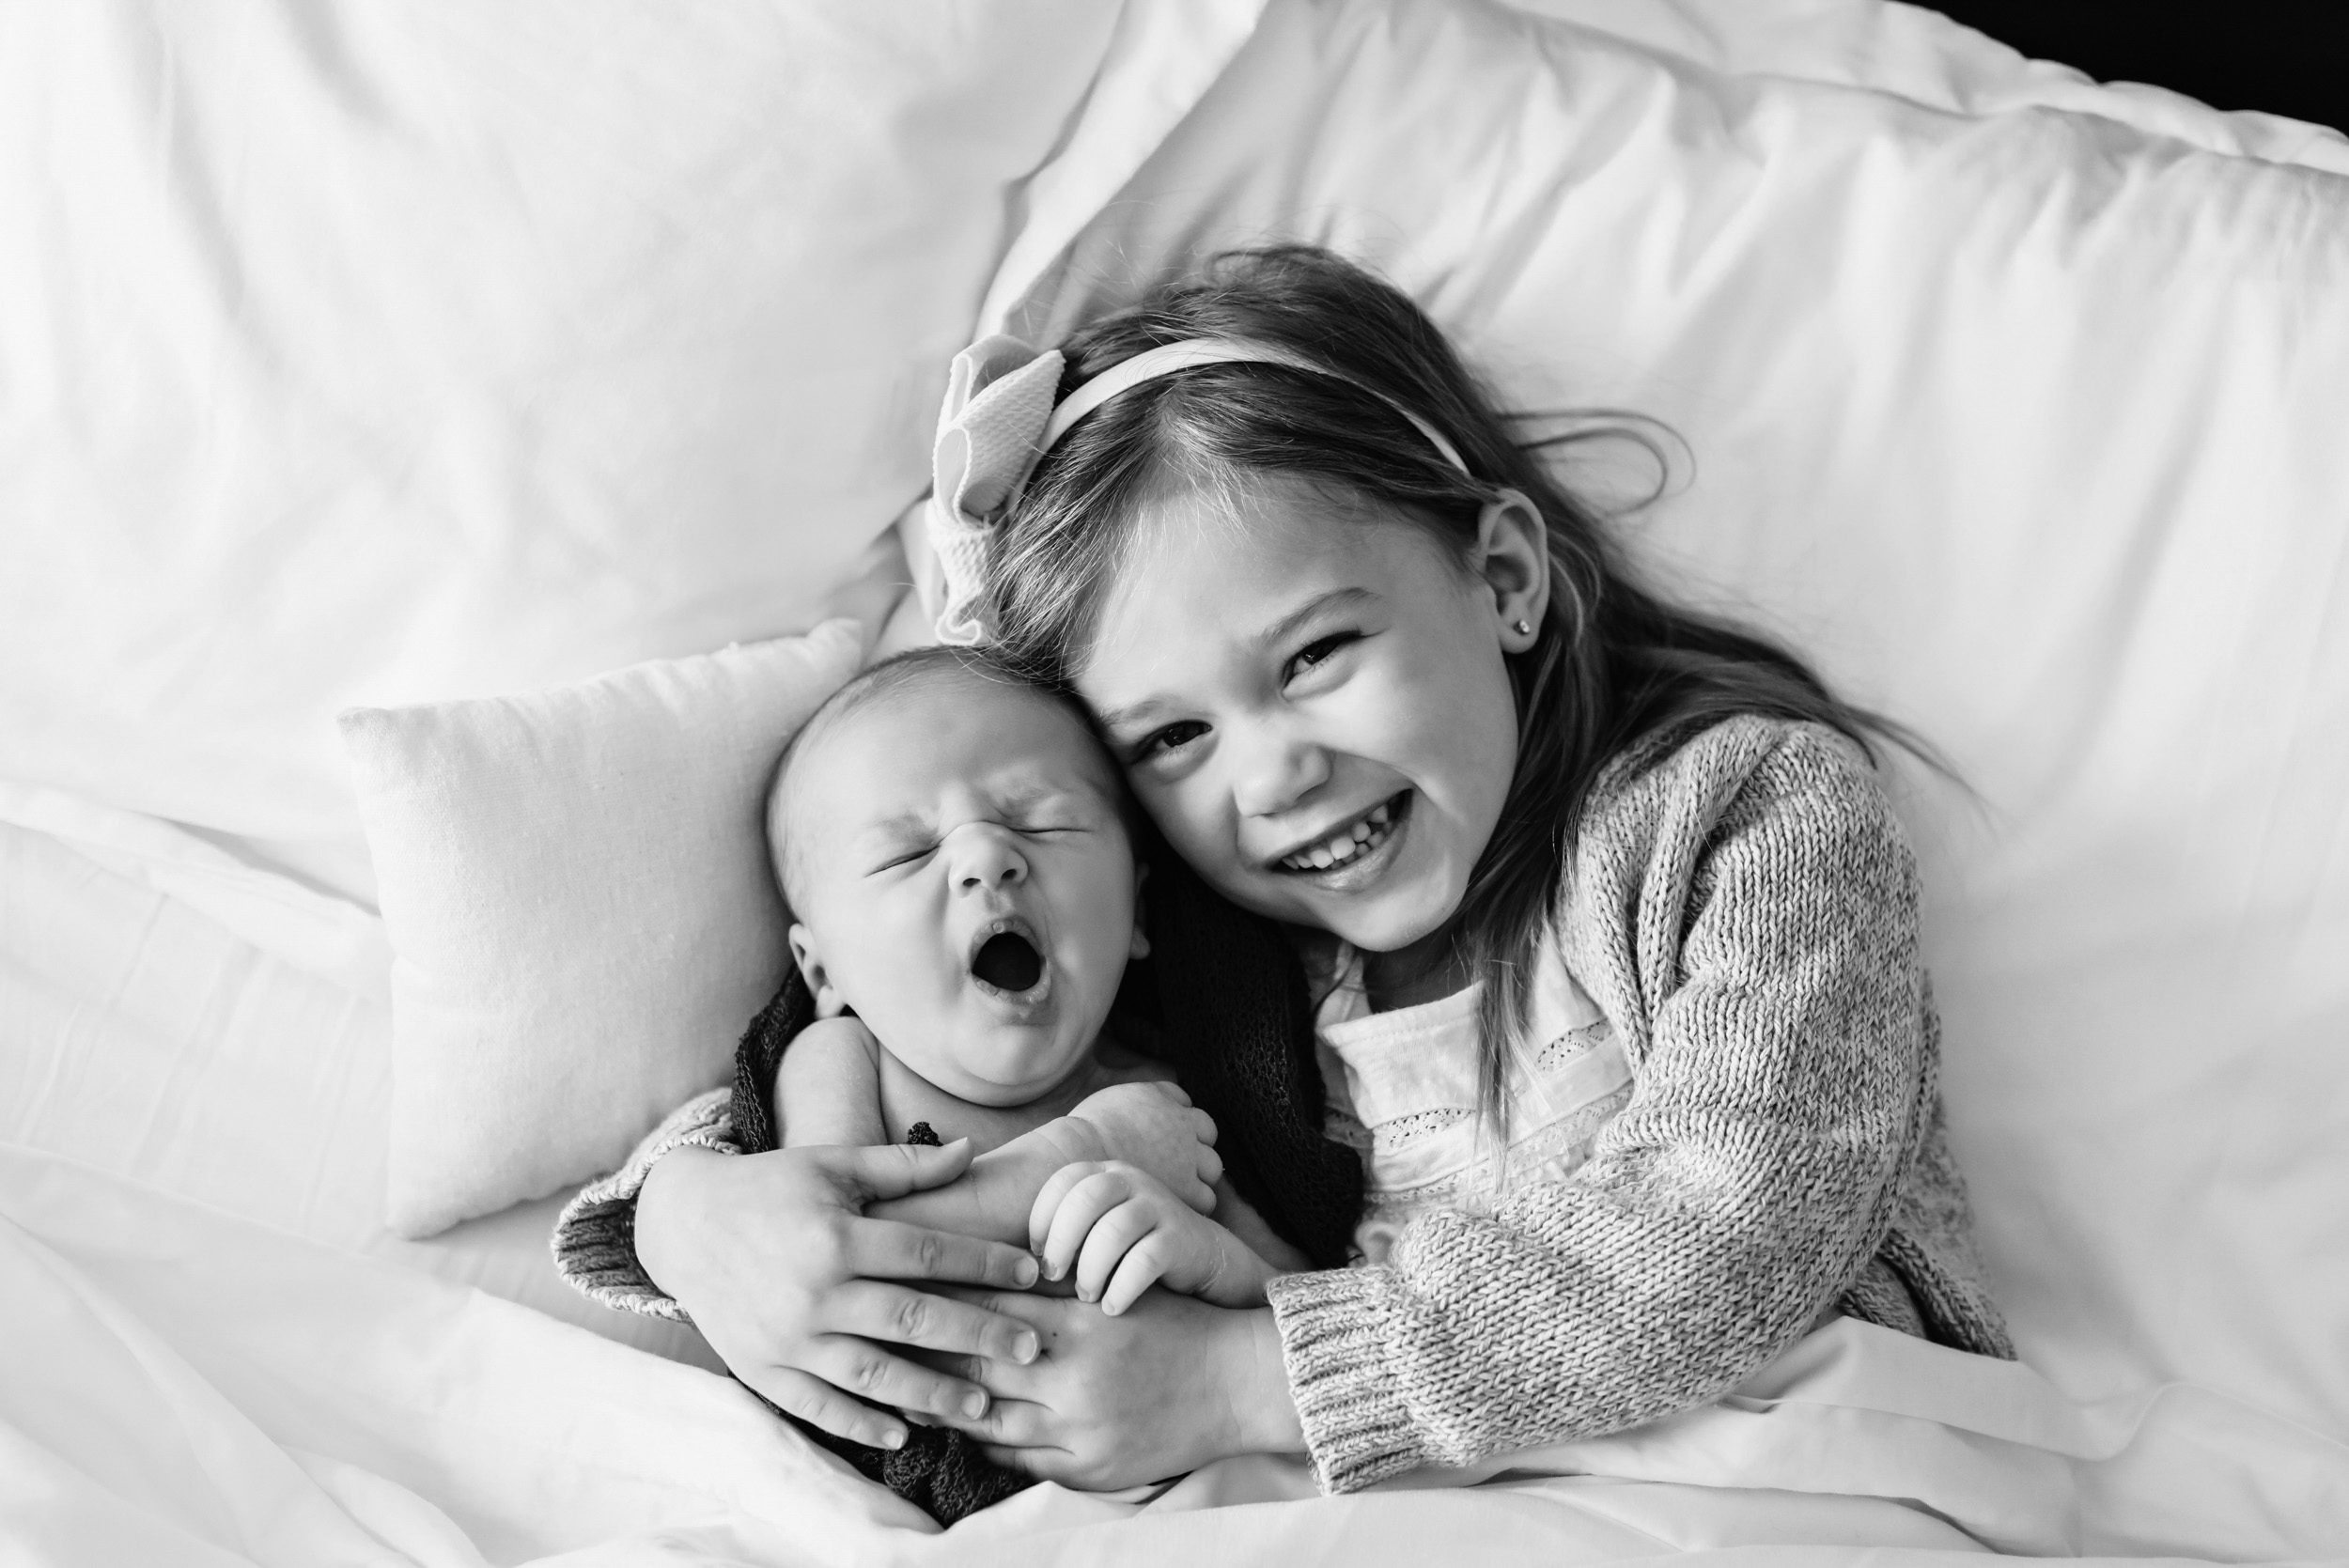 A big sister smiling at the camera and hugging her newborn baby brother while he yawns during a natural newborn photo session